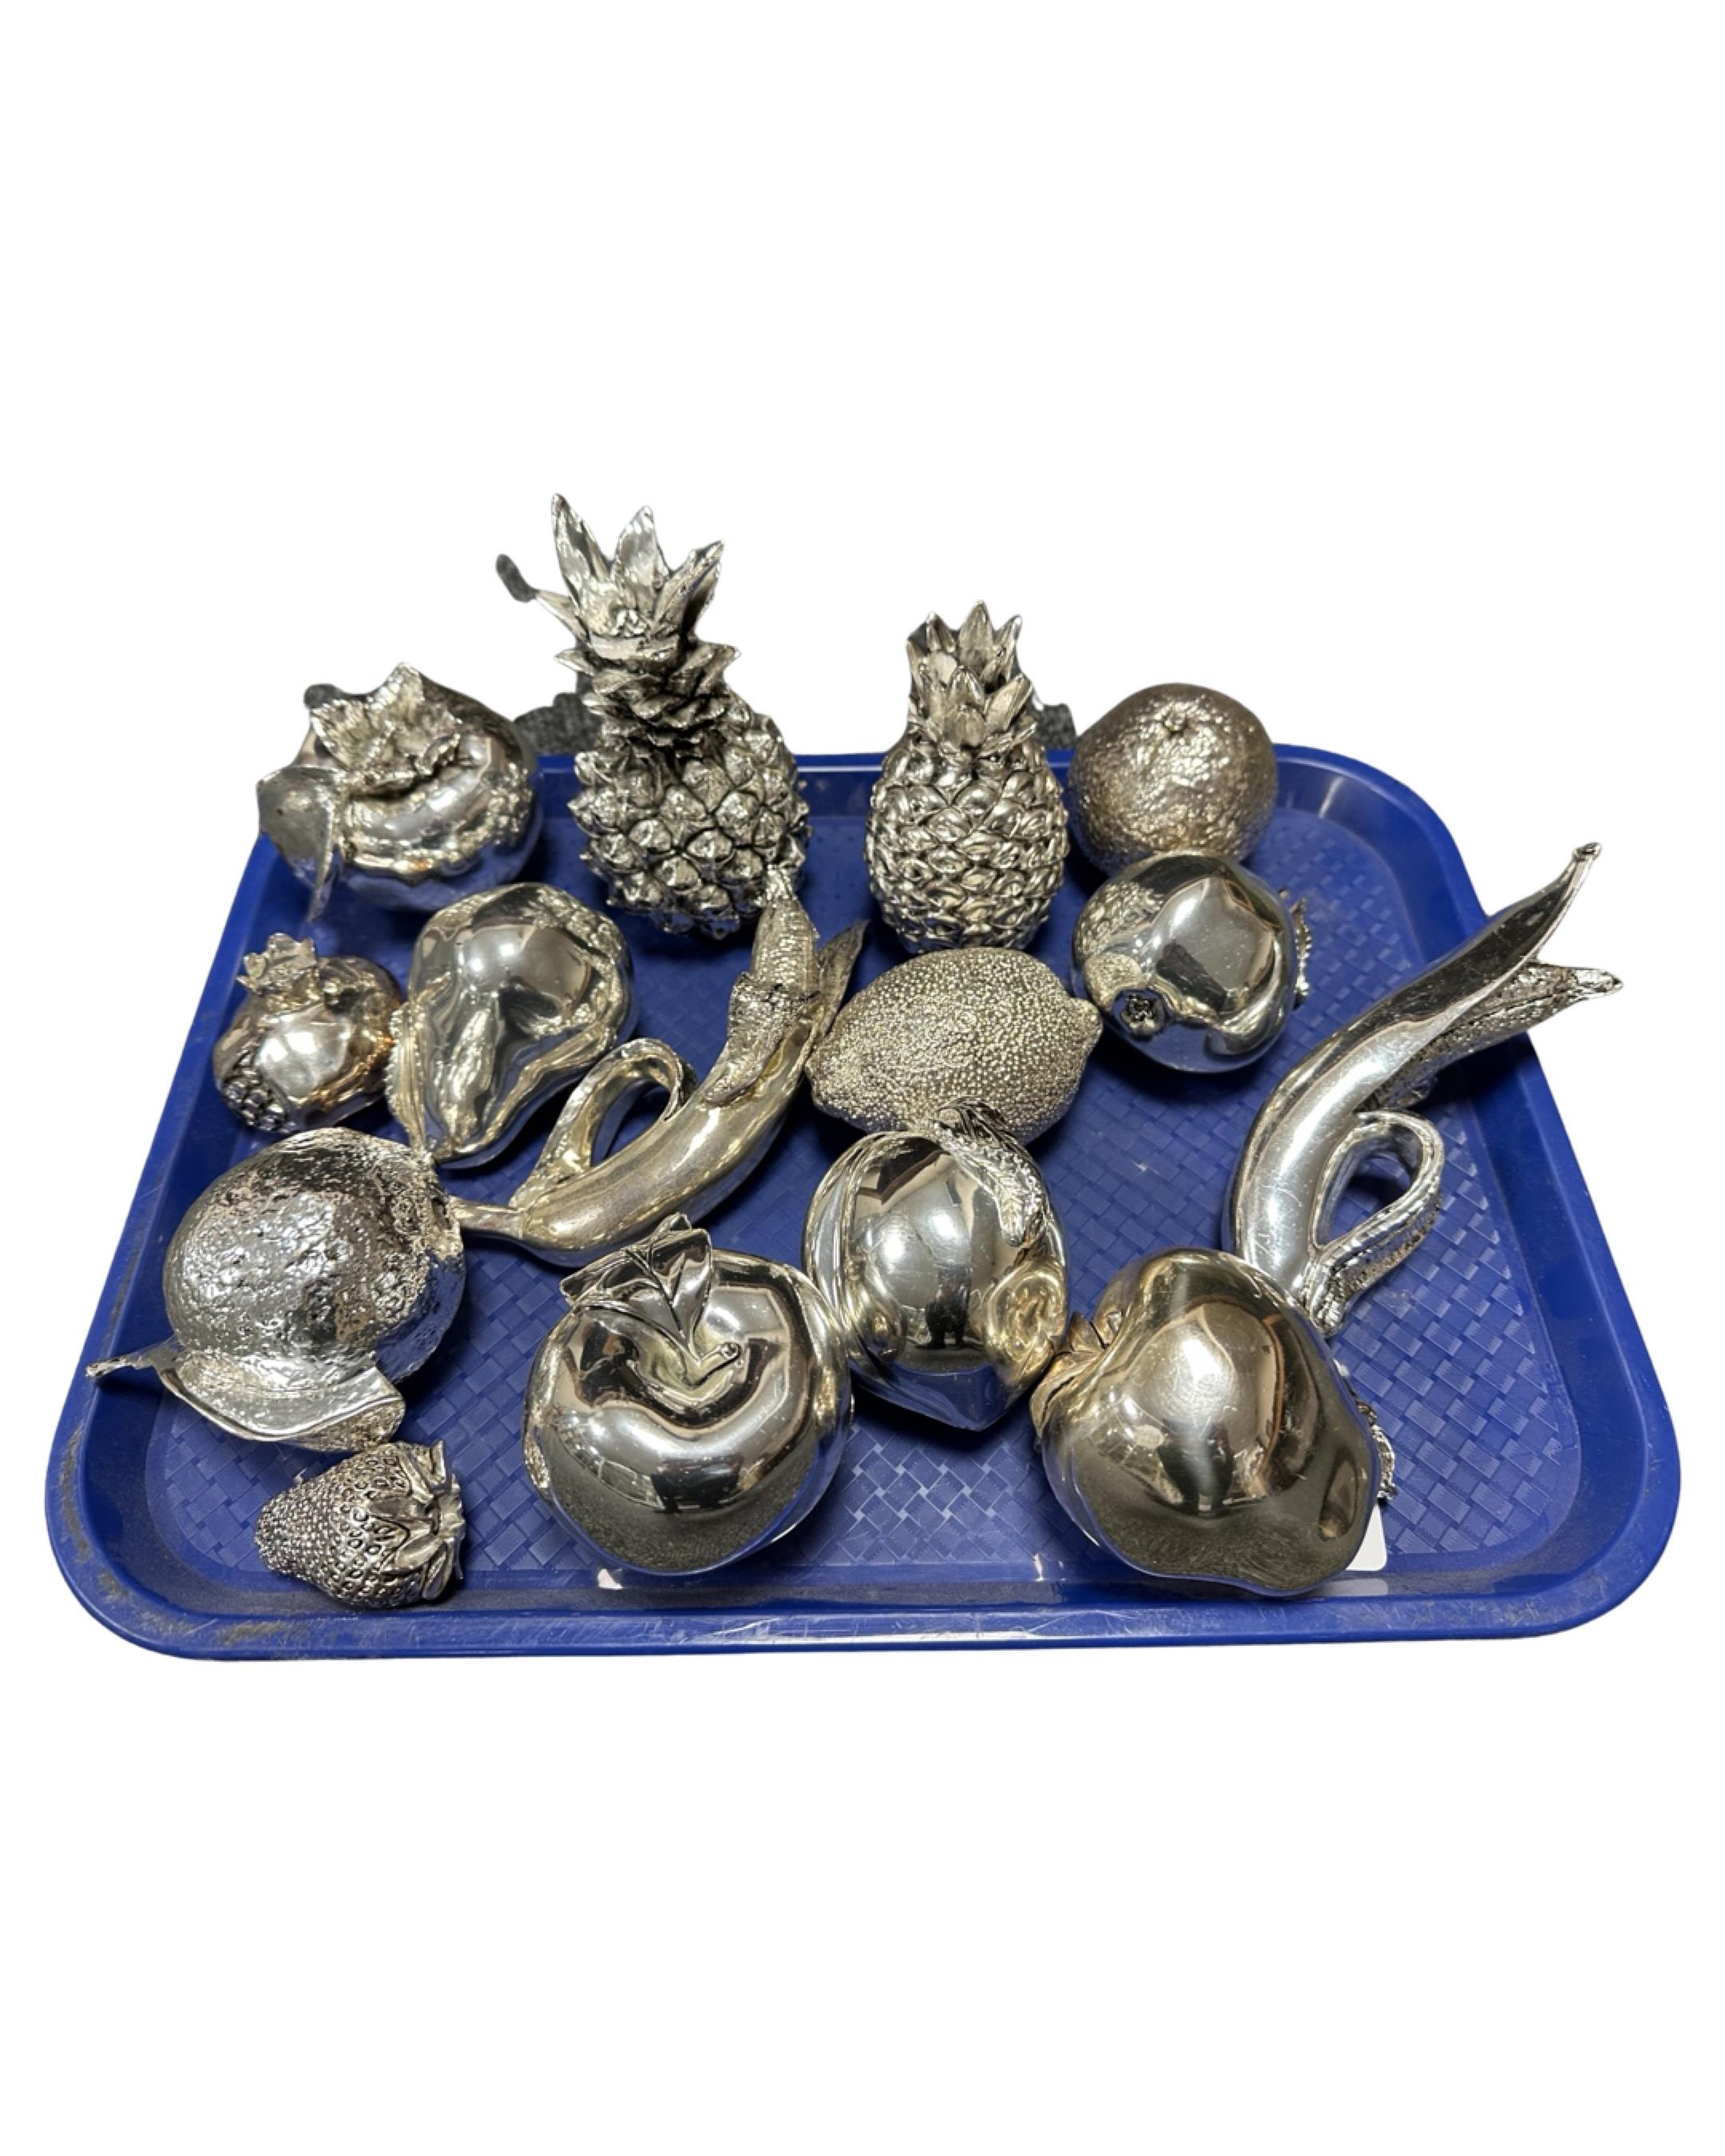 A collection of 15 continental metallic coated fruit ornaments.